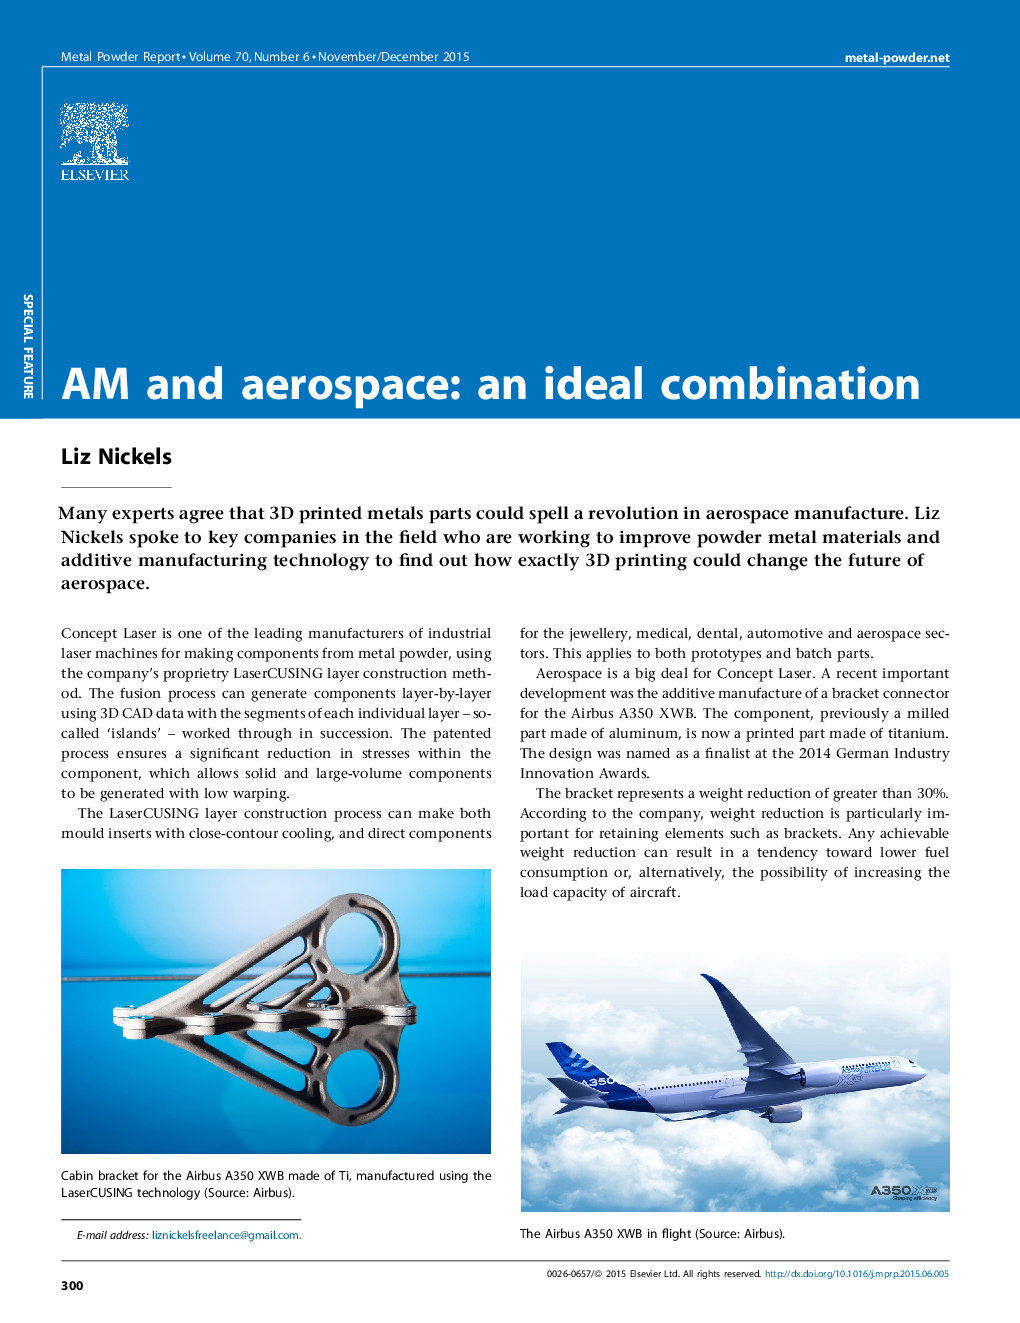 AM and aerospace: an ideal combination